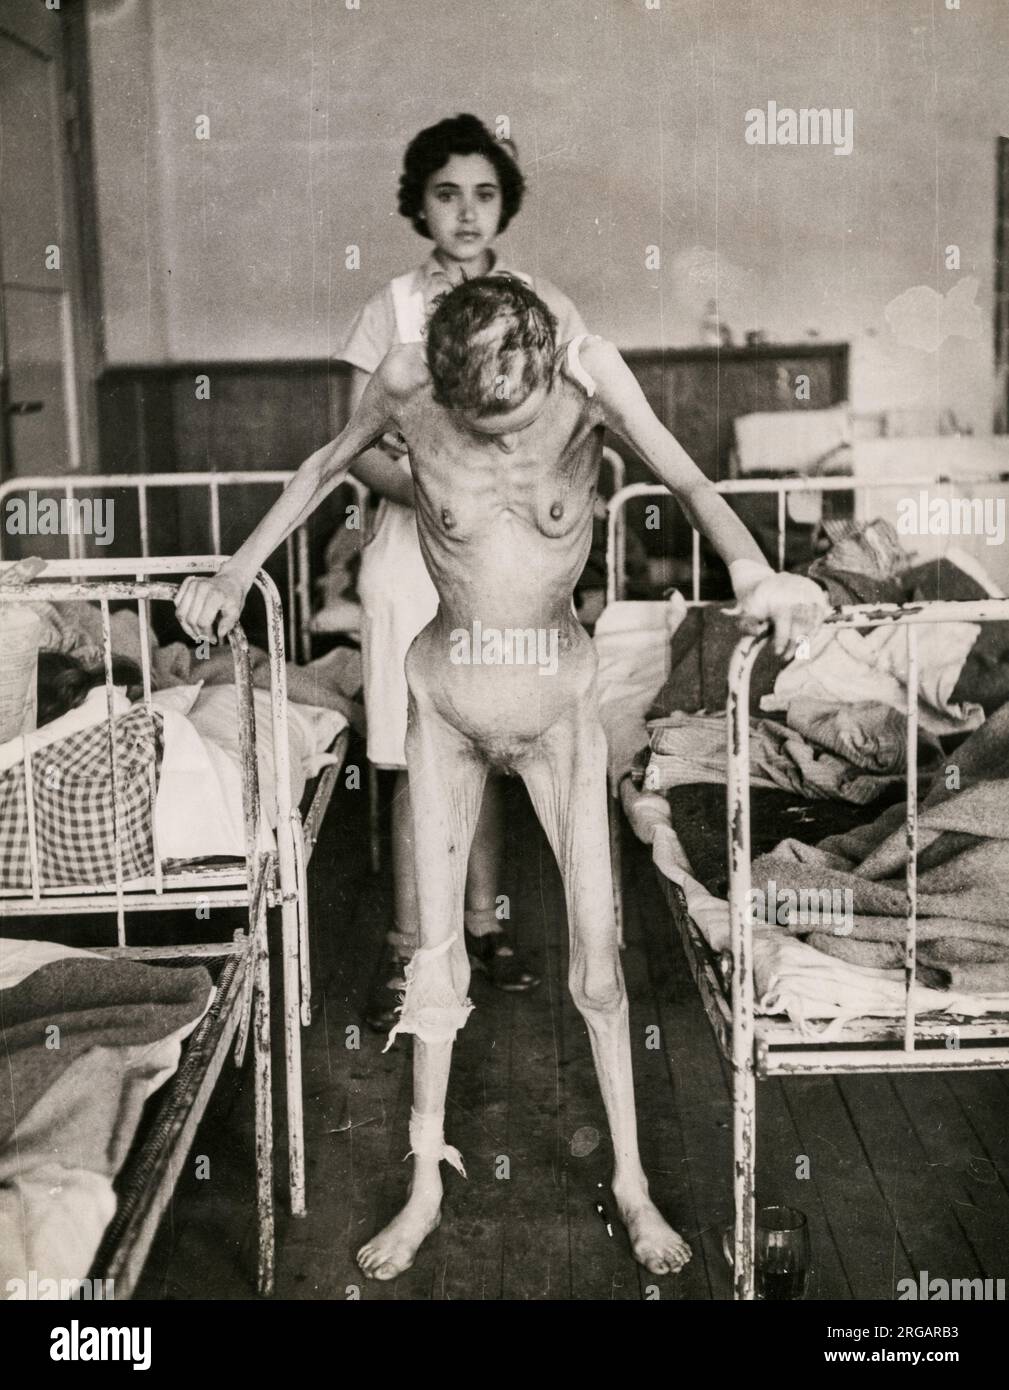 Vintage World War 11 WW2 photograph - Jewish concentration camp survivor Margit Shcwartz, aged 31,  of Budapest, in hospital. According to the caption she chose to pull herself into this position unaided, so she could be photographed, having previously been vitually unable to move. Stock Photo